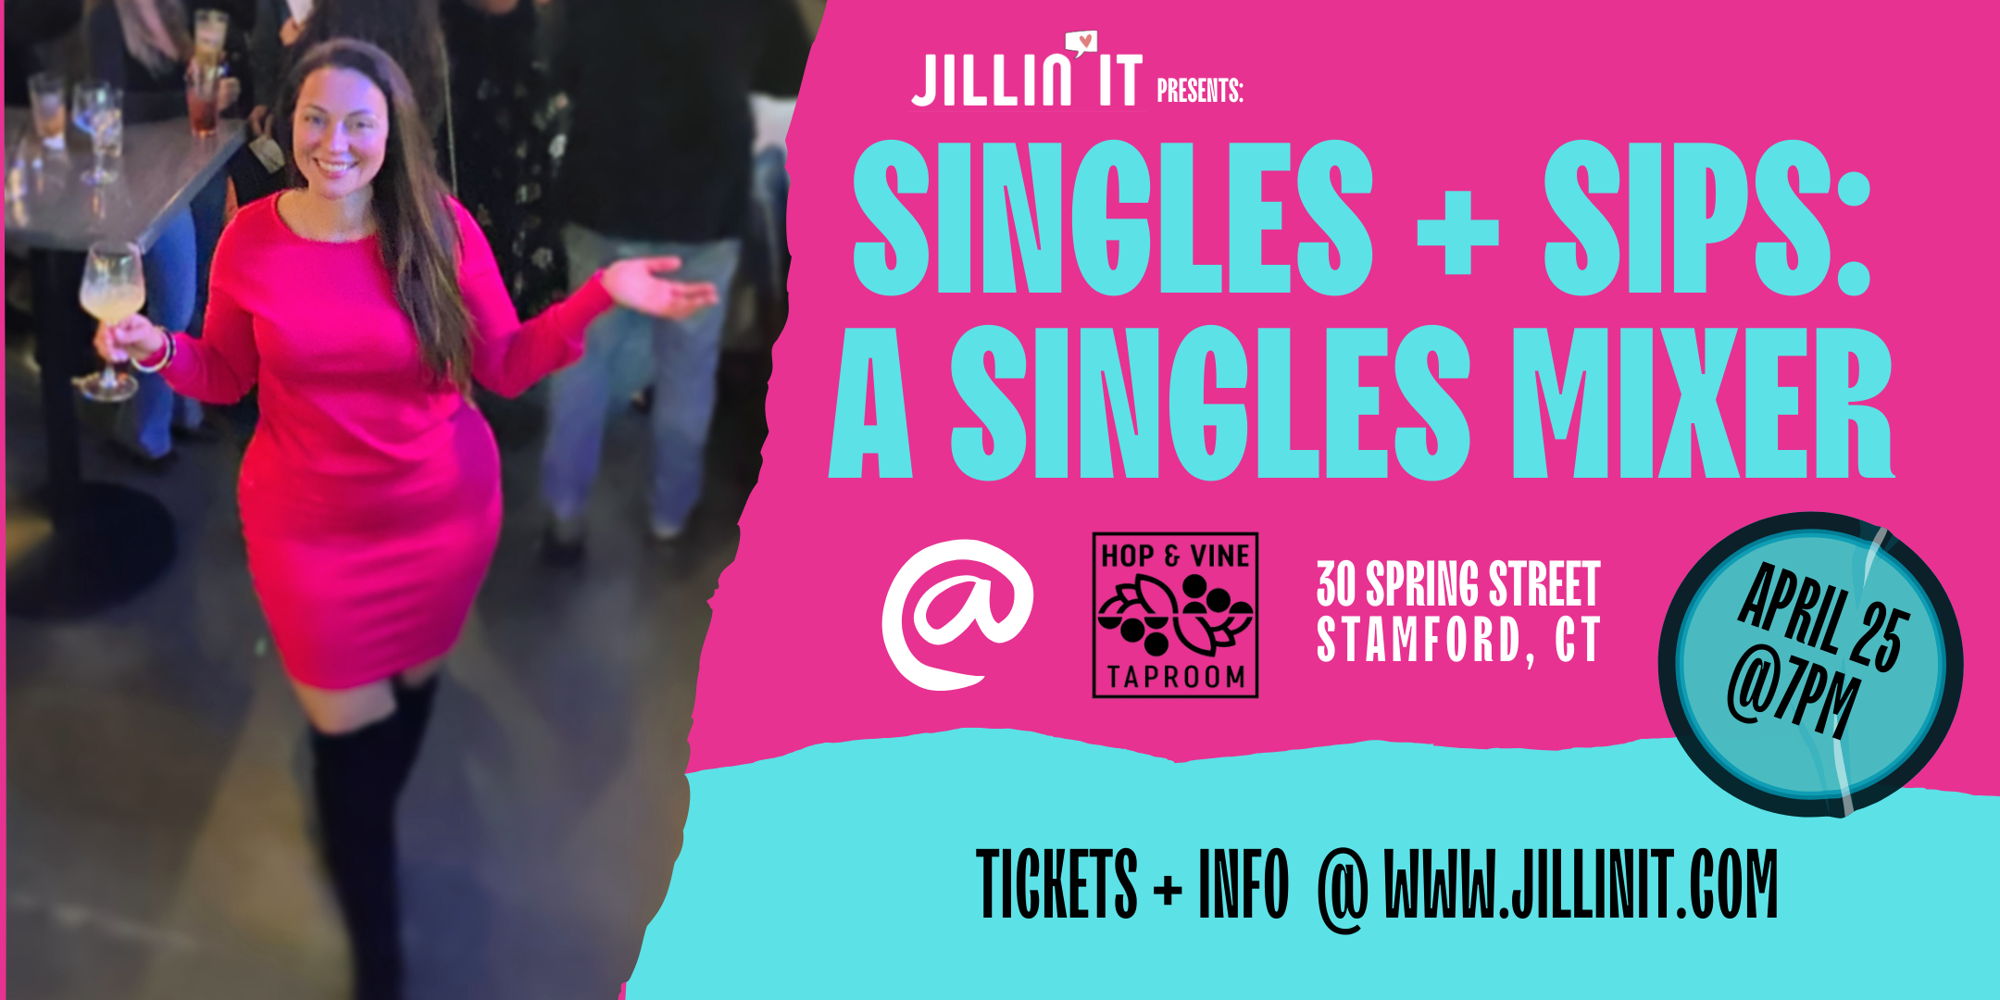 Singles + Sips: A Singles Mixer + Matchmaking Taproom Event promotional image